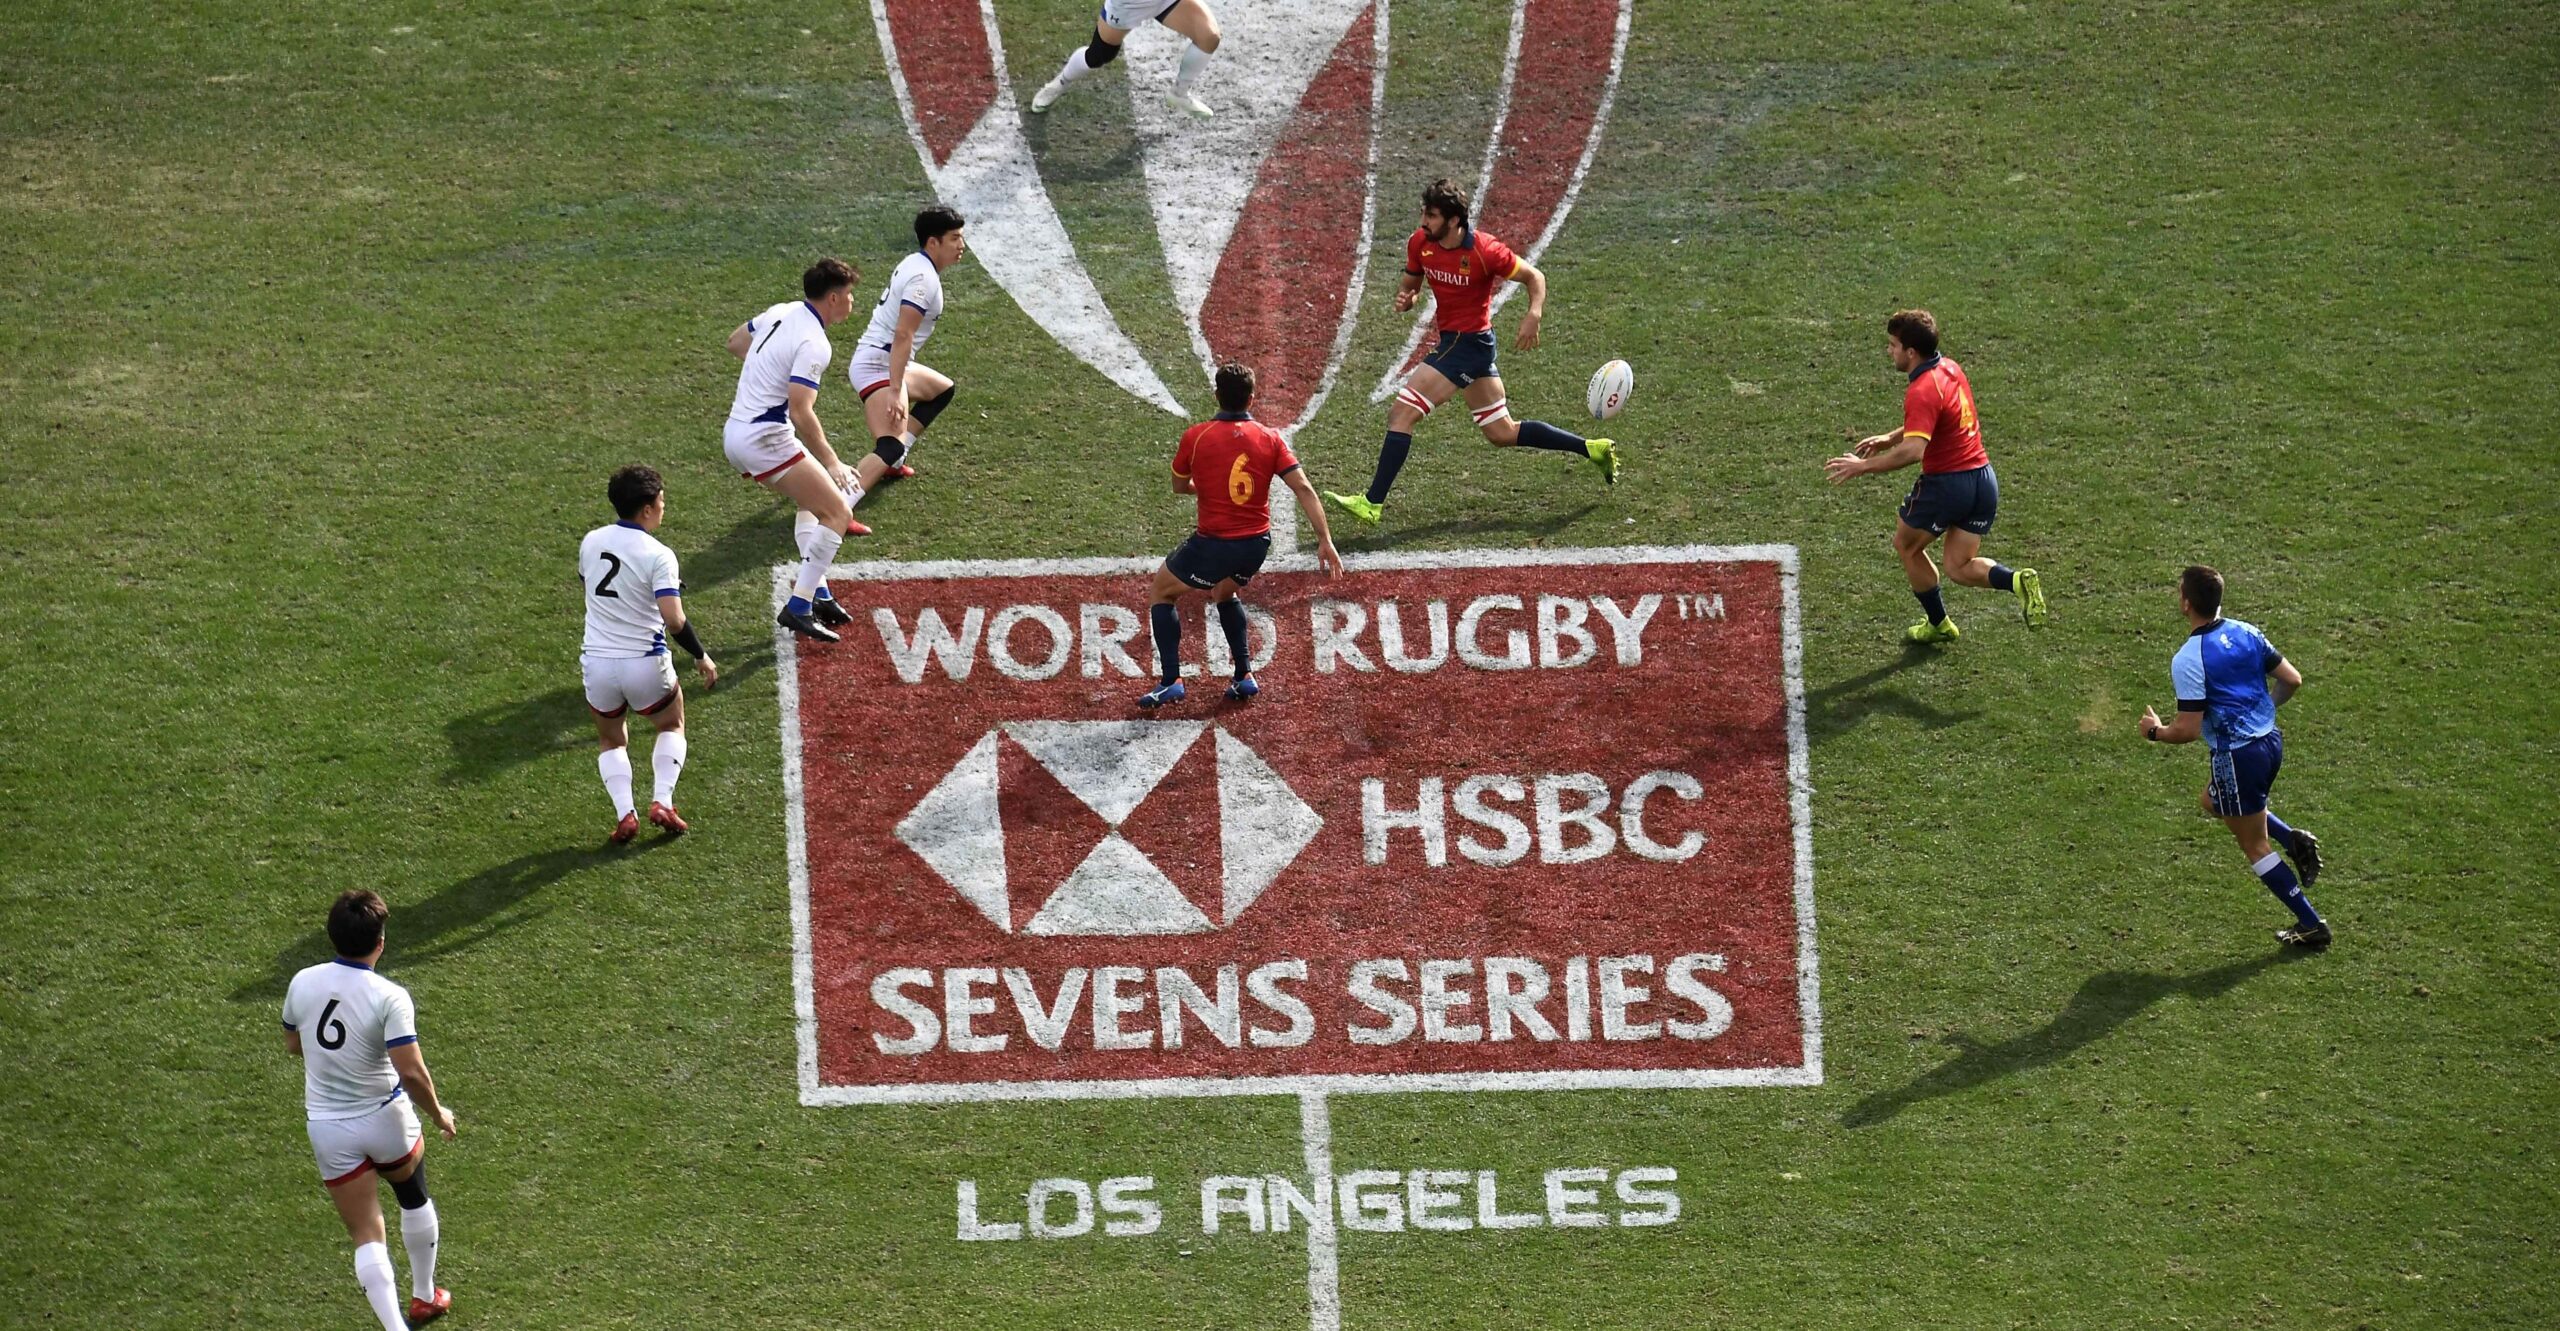 Looking back on the history of World Rugby Sevens in the United States